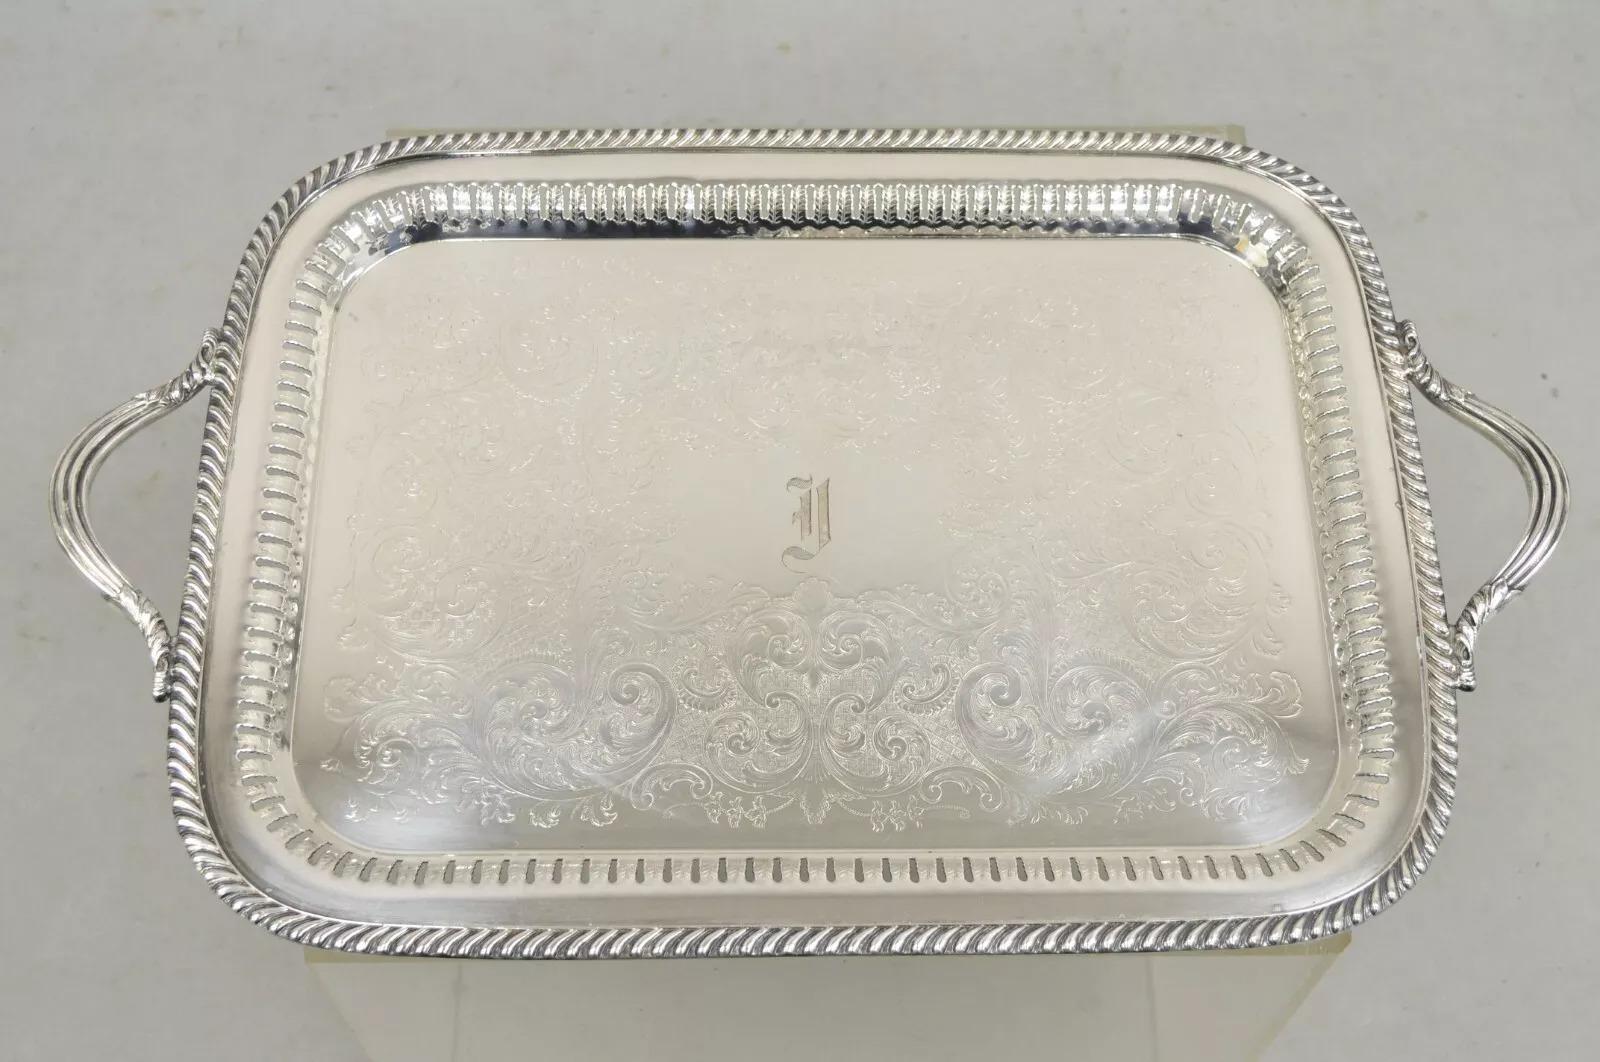 Antique LBS Co Victorian Silver Plated Gallery Pierced Serving Platter Tray. Item features 